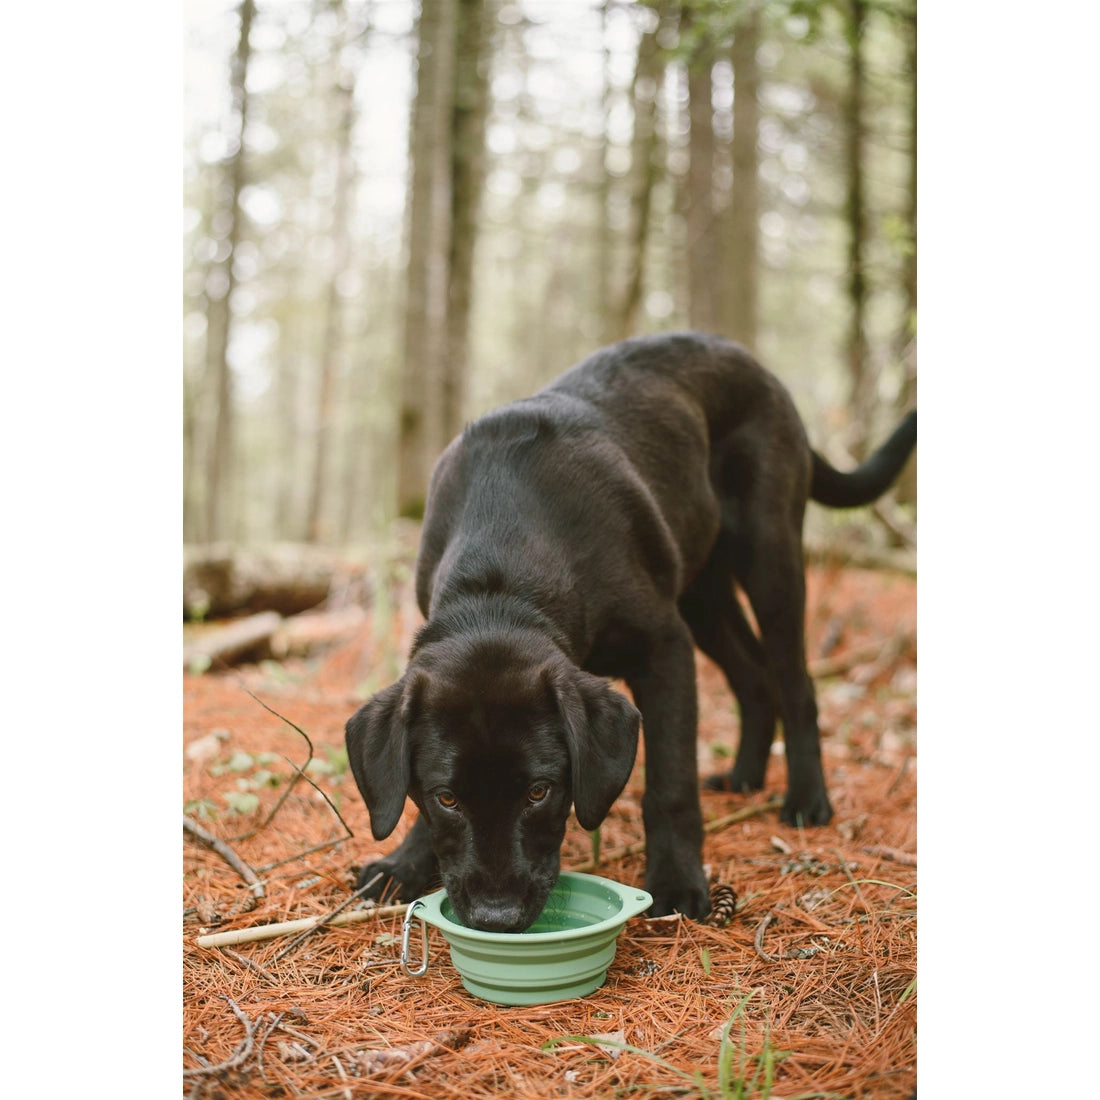 Collapsible Silicone Dog Bowl